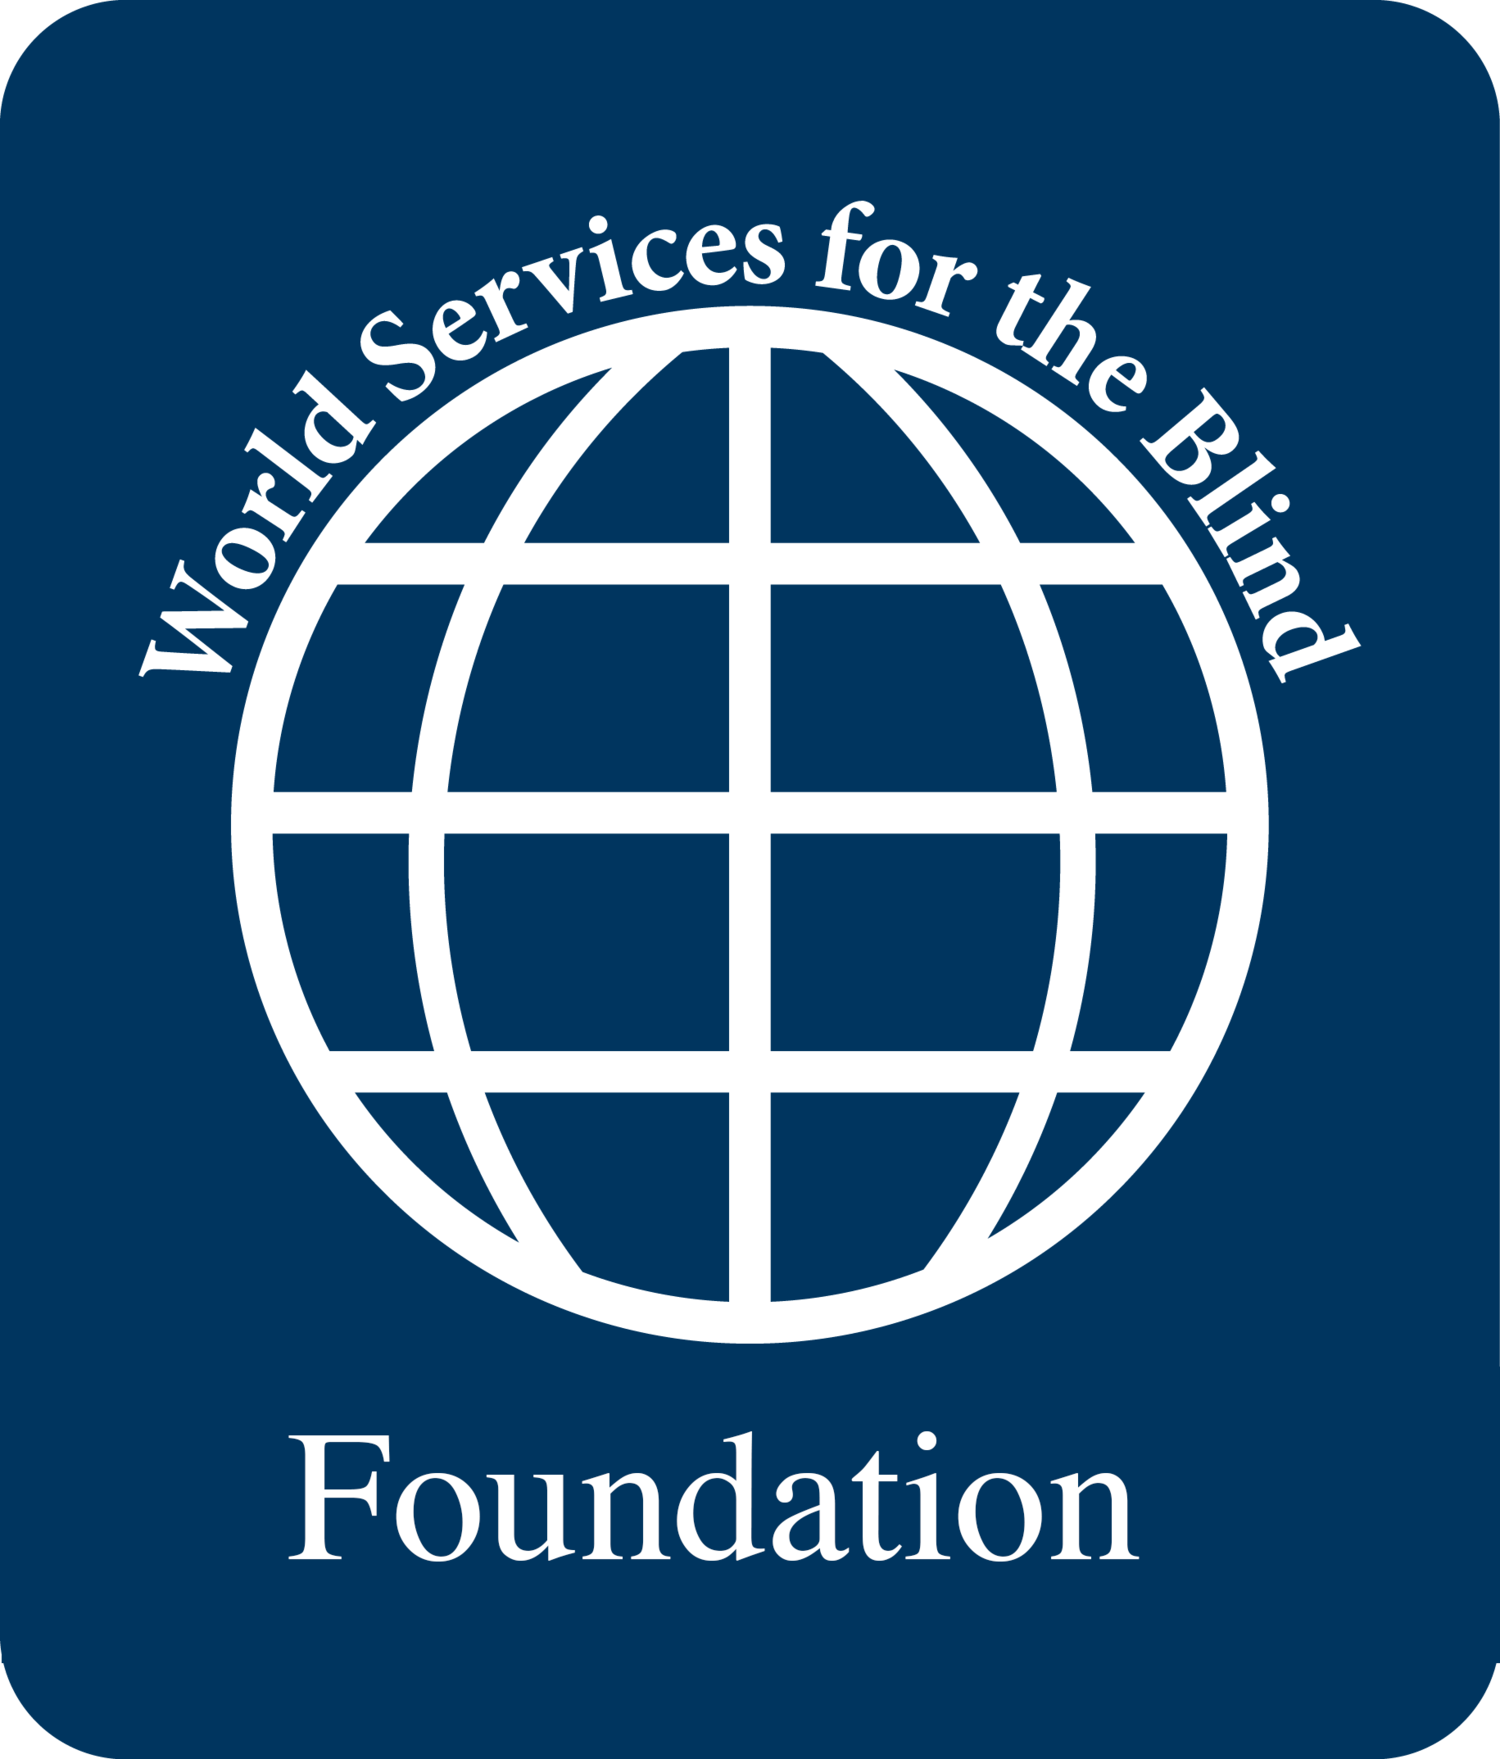 WORLD SERVICES FOR THE BLIND FOUNDATION